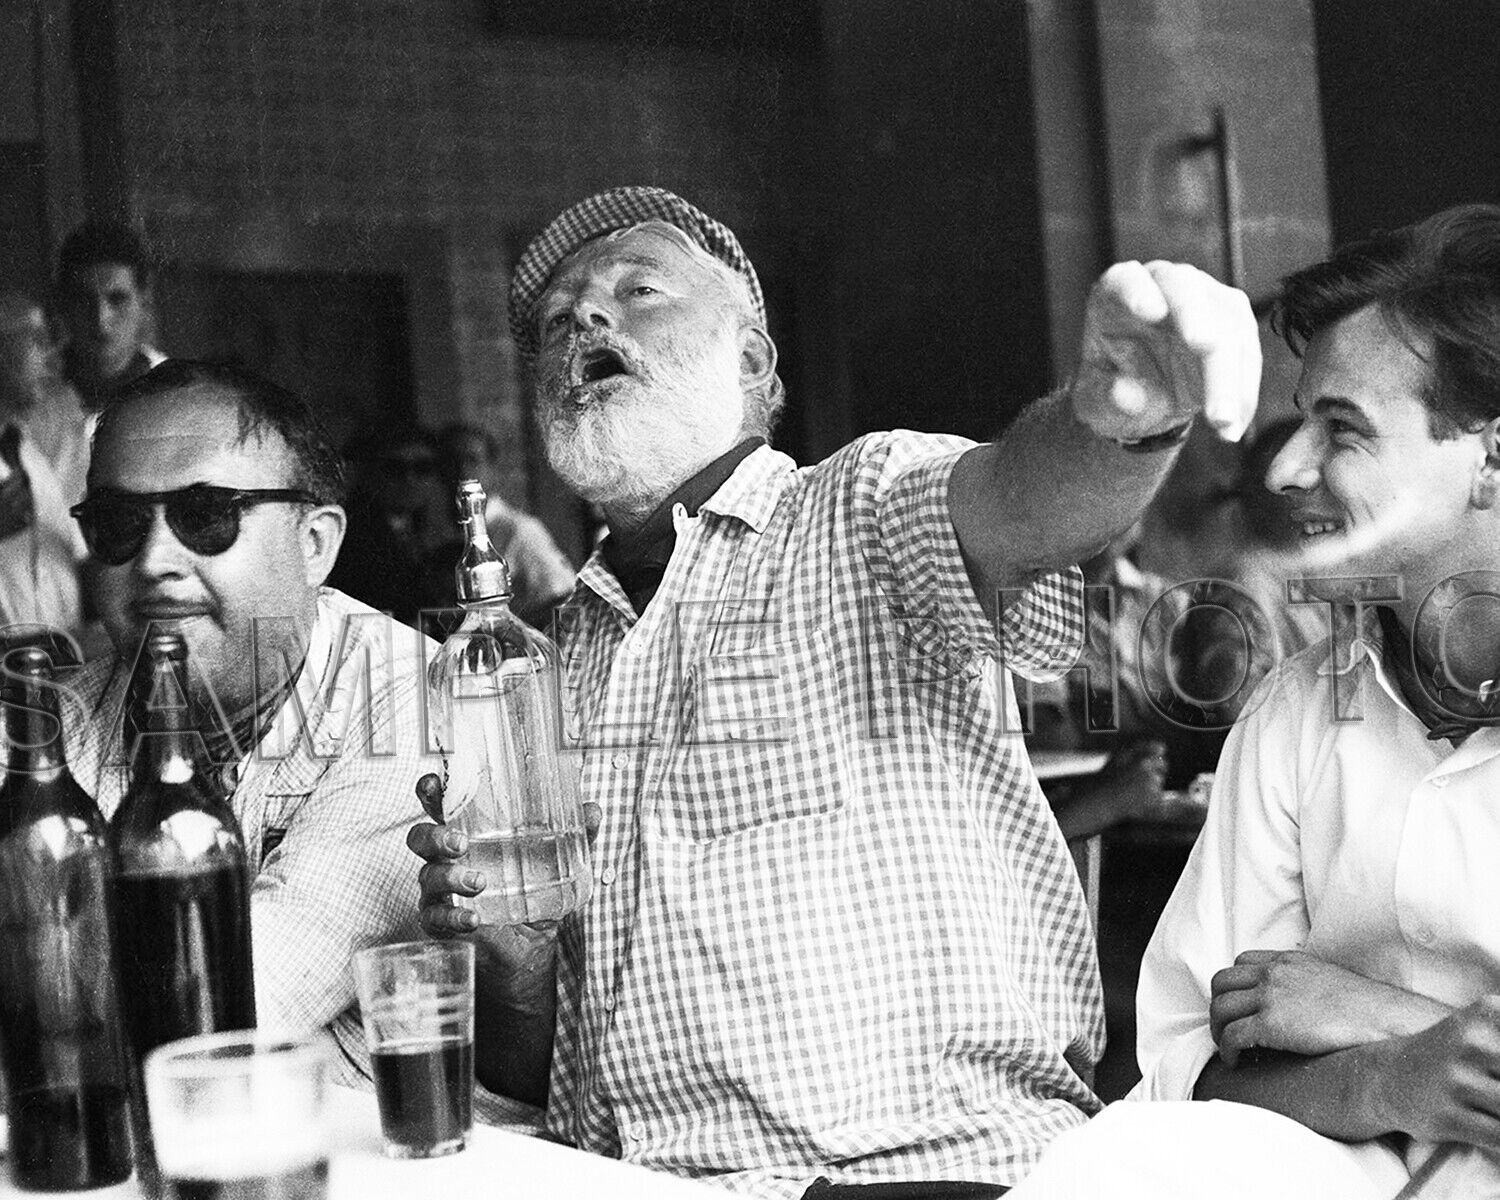 ERNEST HEMINGWAY AMERICAN AUTHOR DRINKING AT A BAR 8x10 PHOTO 